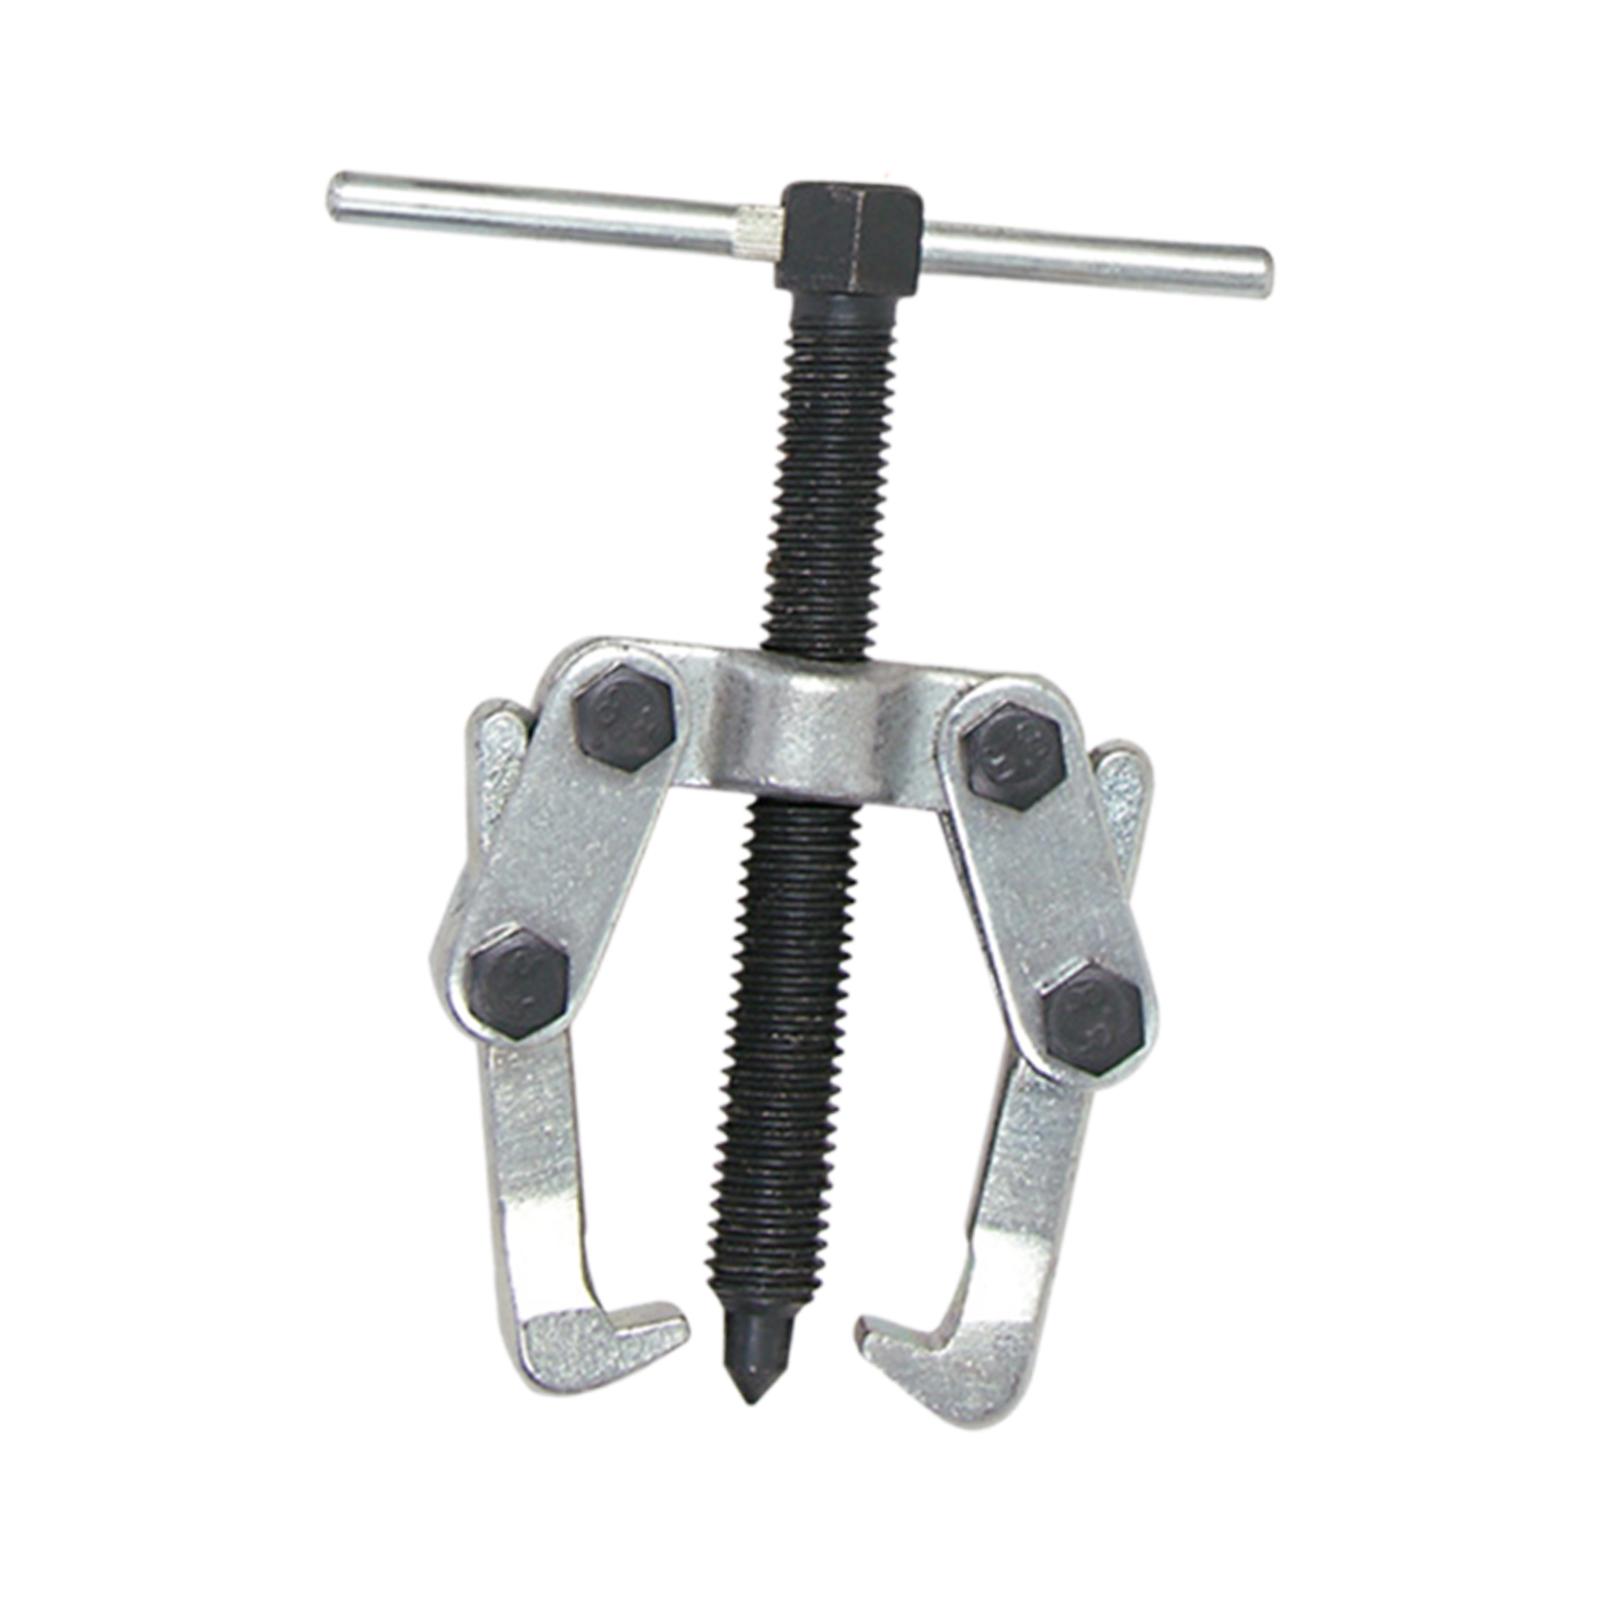 Bearing Gears Puller Jaw Puller Professional Accessories Pump Pulley Remover 2 Jaws 10 to 60mm